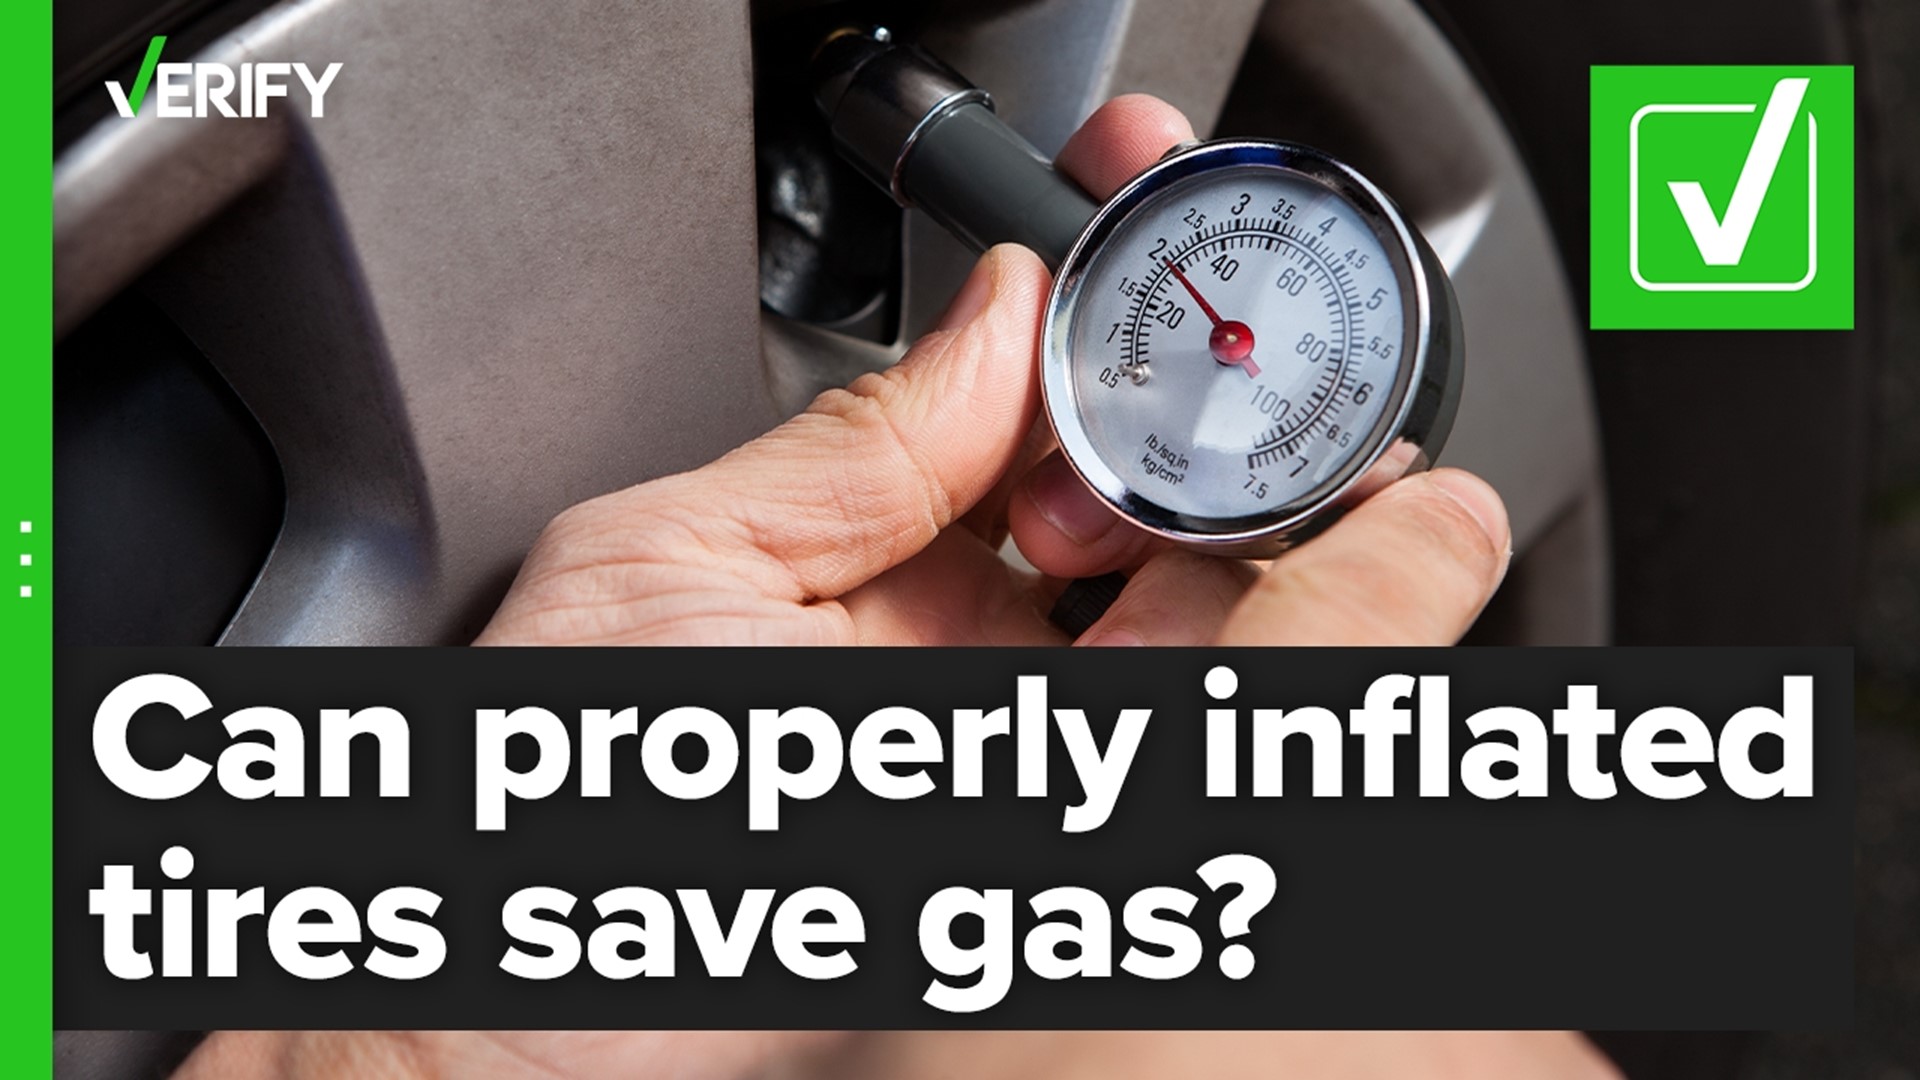 Keeping your tires properly inflated, driving the speed limit and removing excess weight from your car are all ways to help improve your gas mileage.